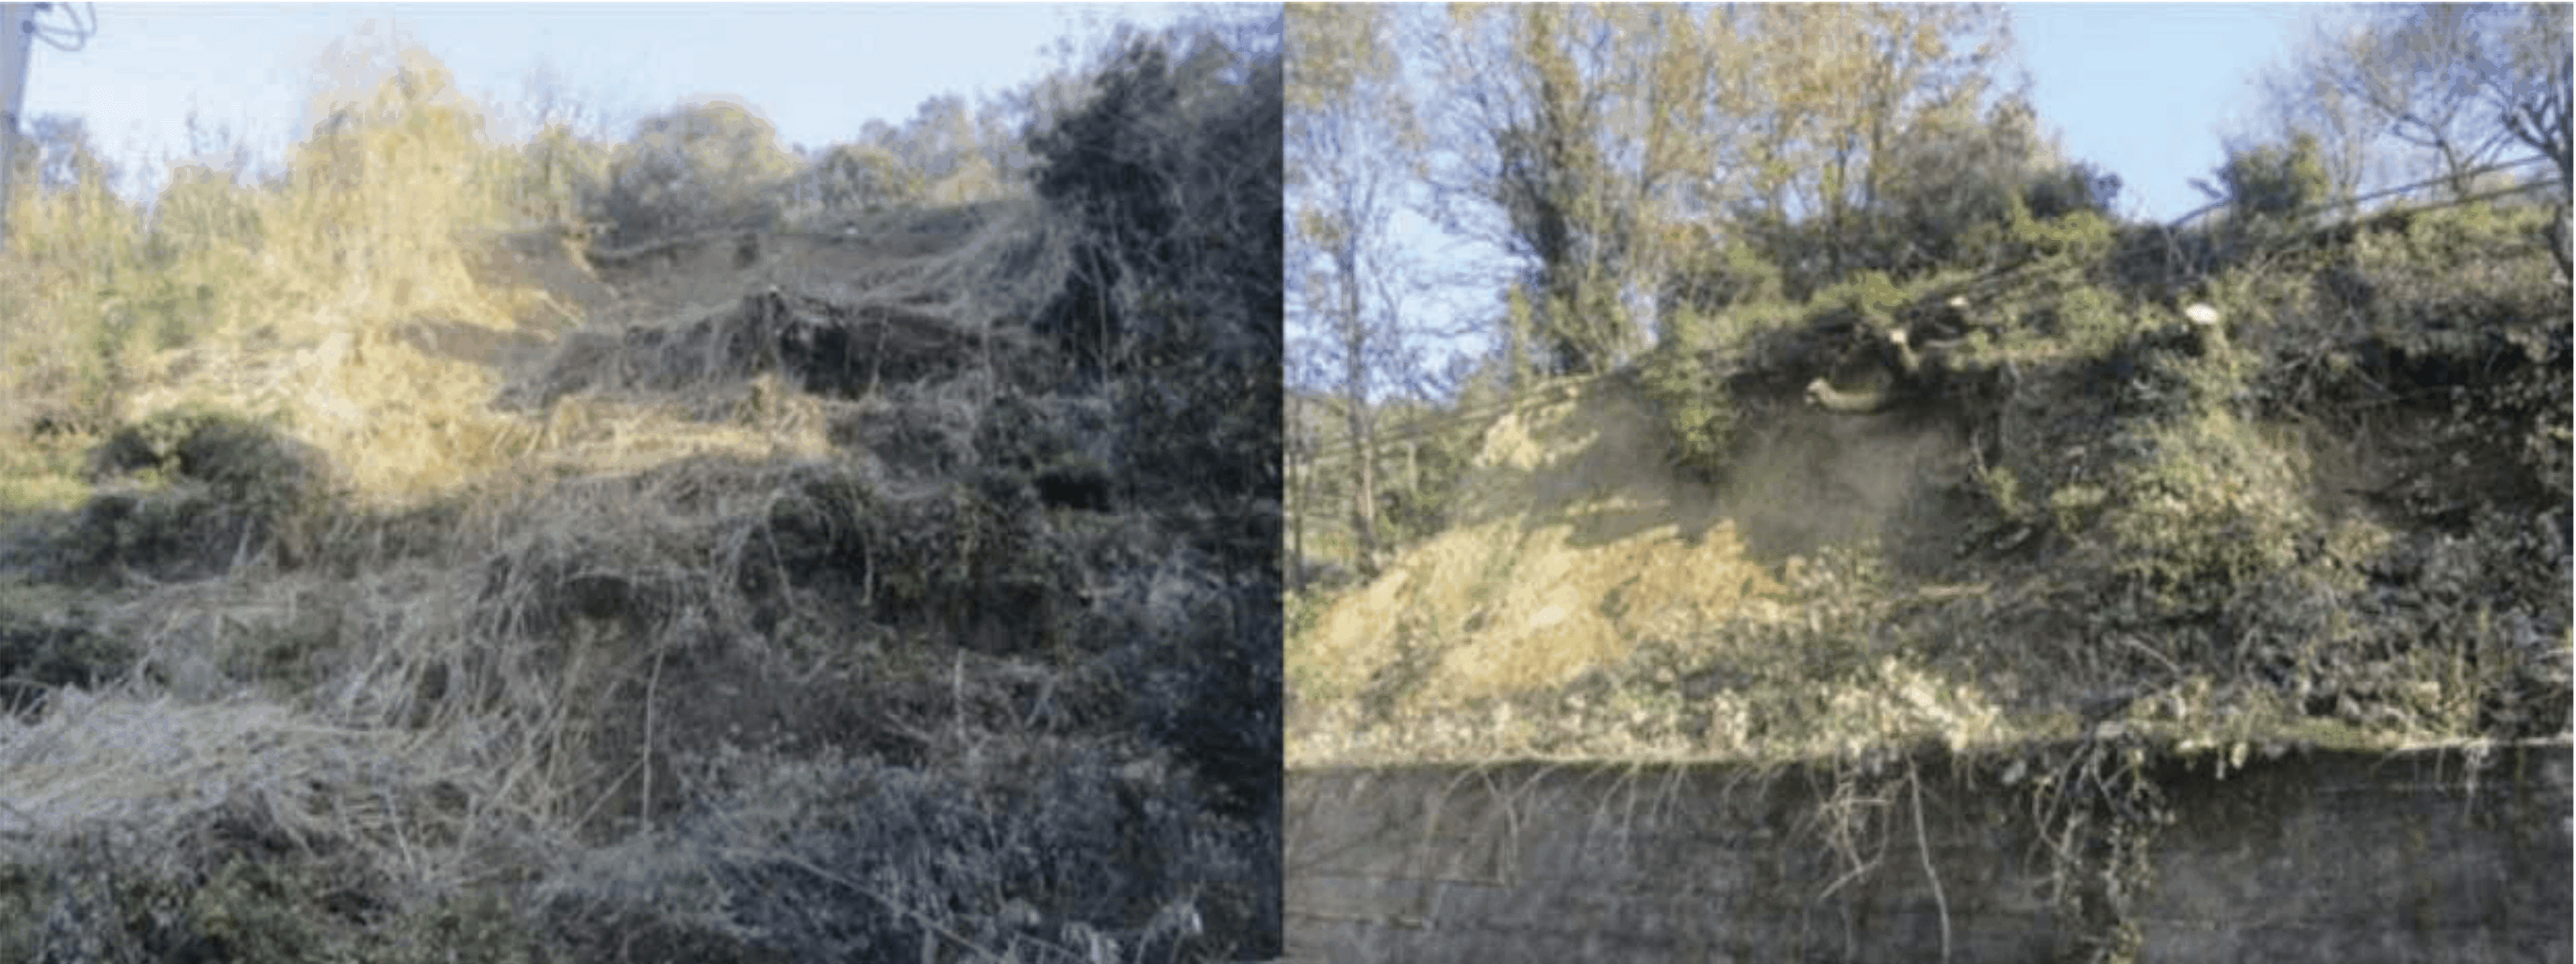 Landslide from ch. 2+070 to 2+130 (Via Ferrania) (left) and landslide from ch. 2+220 to ch. 2+330 (right).